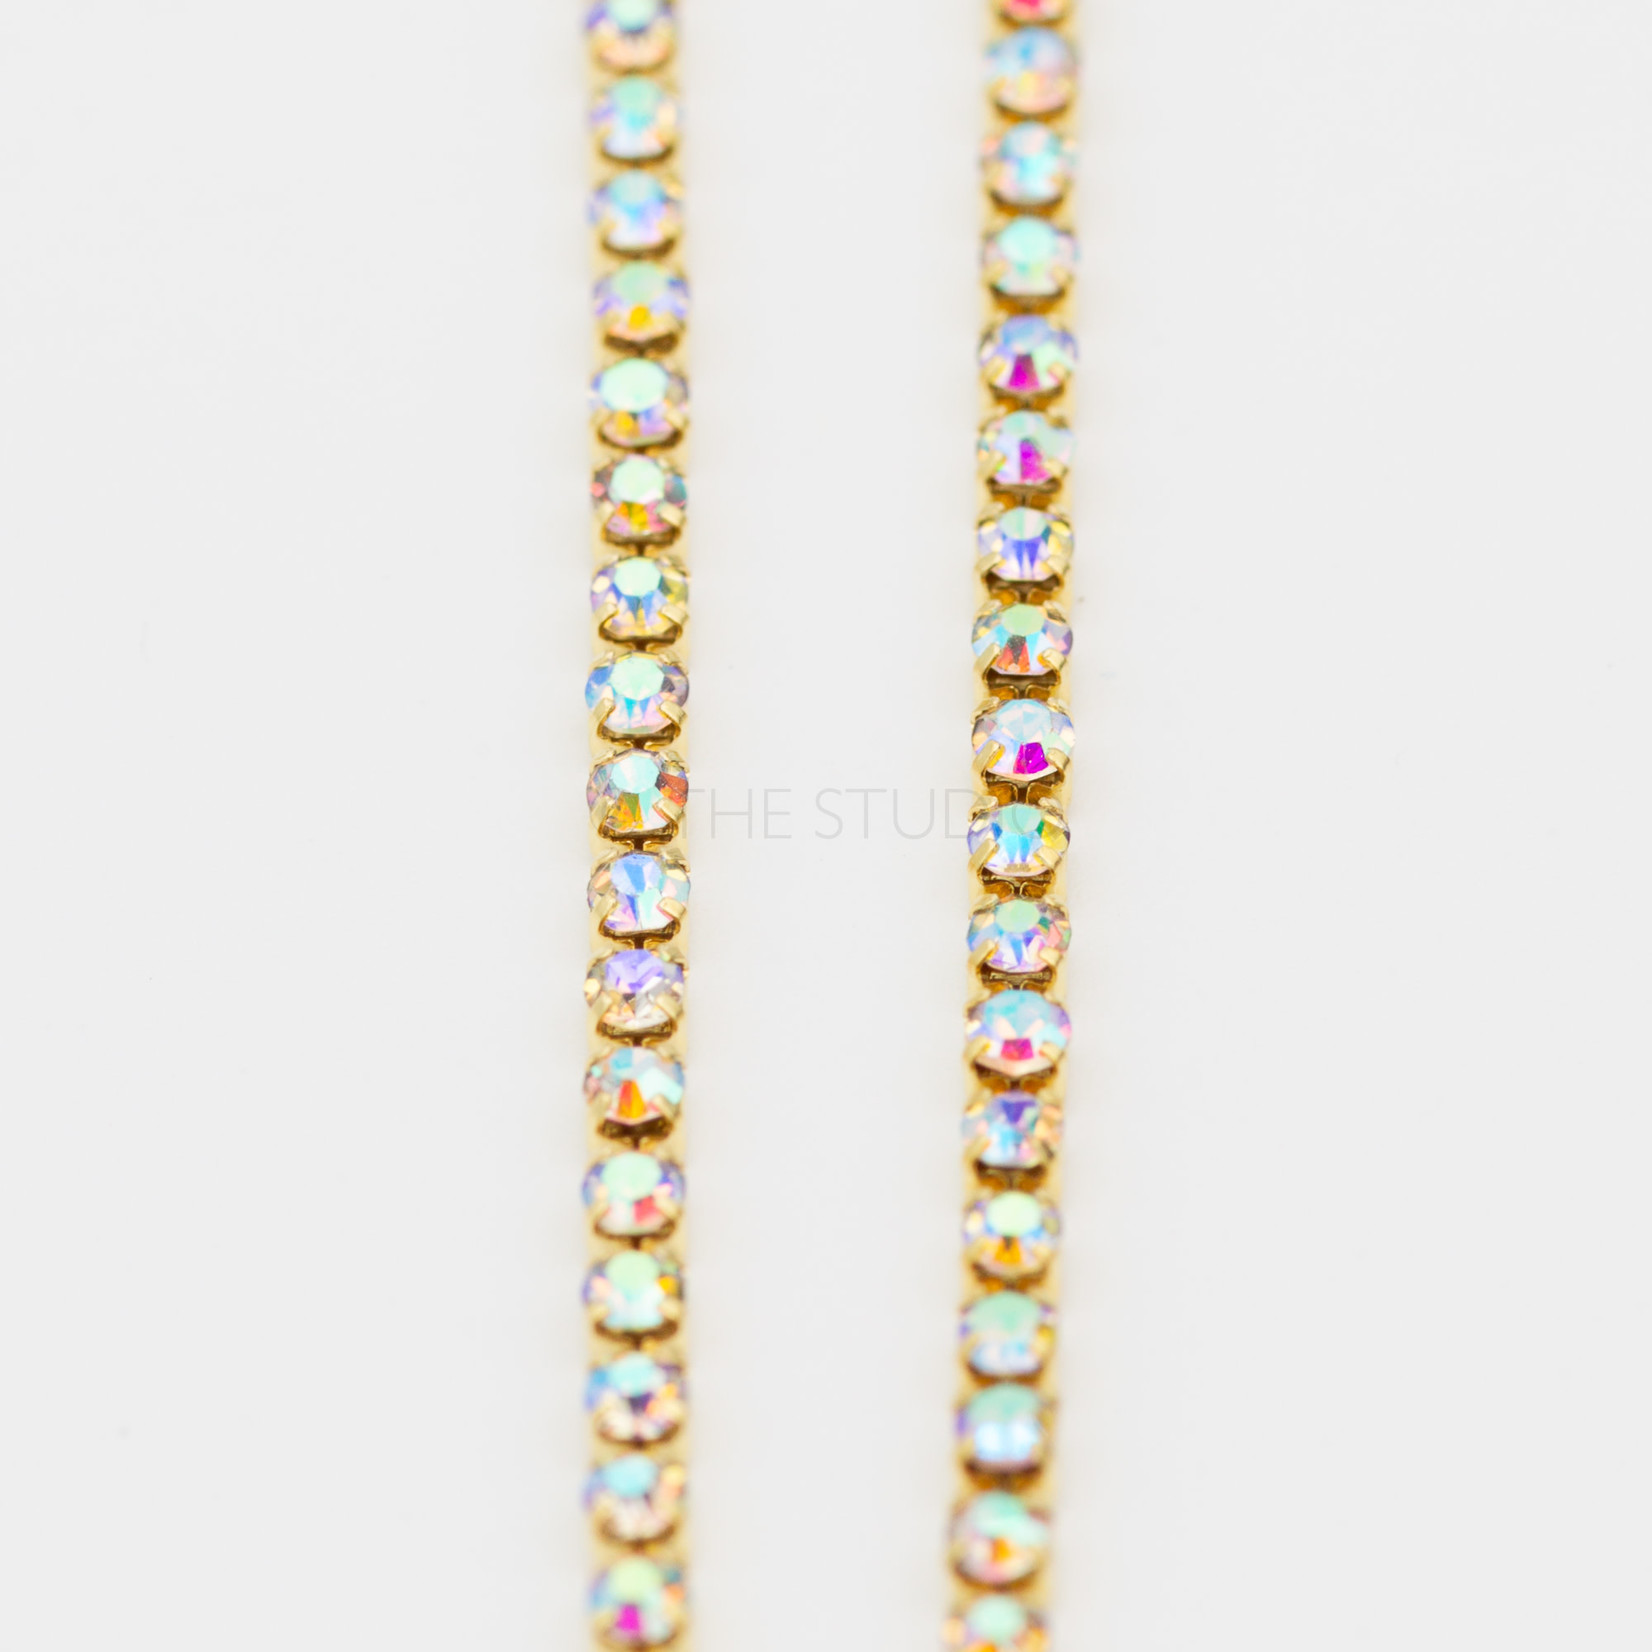 The Studio The Studio - Art Pack #346 - Assorted Nail Chains - 02